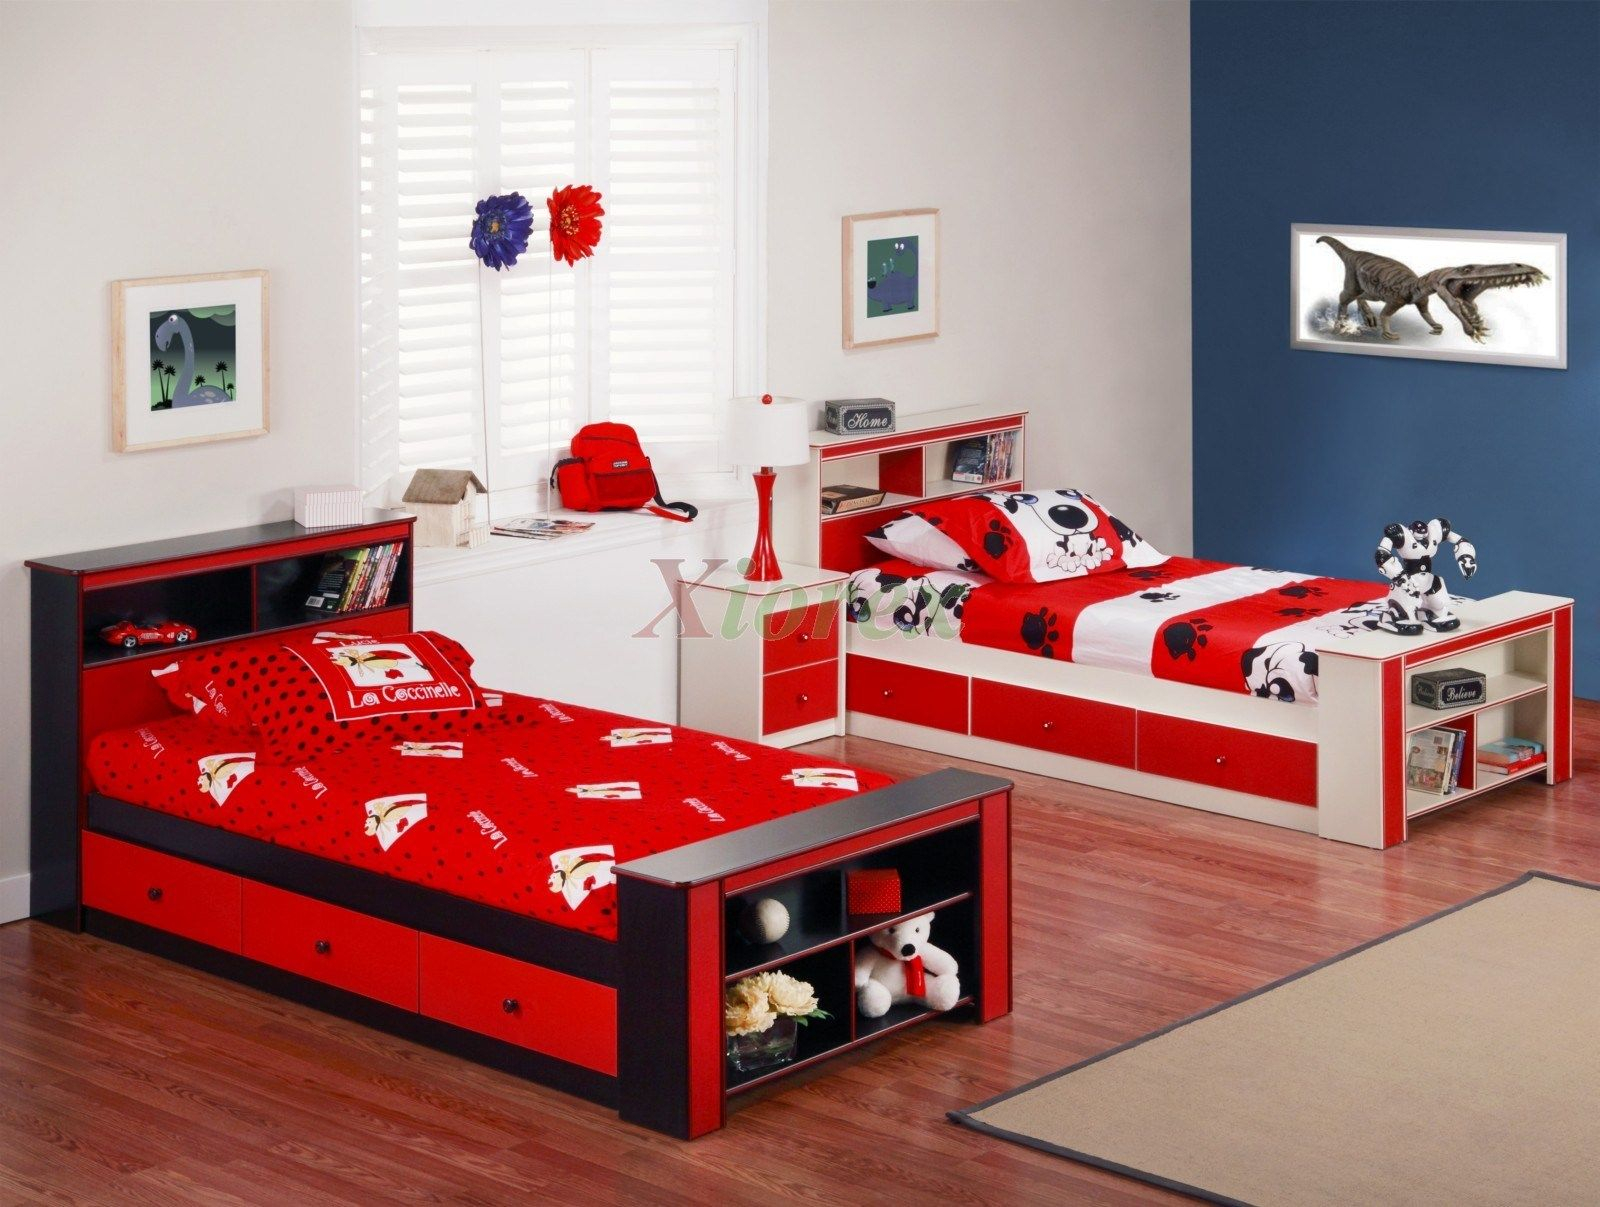 30 Wonderful Image Of Kids Bedroom Furniture Boys Kids Room Twin intended for dimensions 1600 X 1207